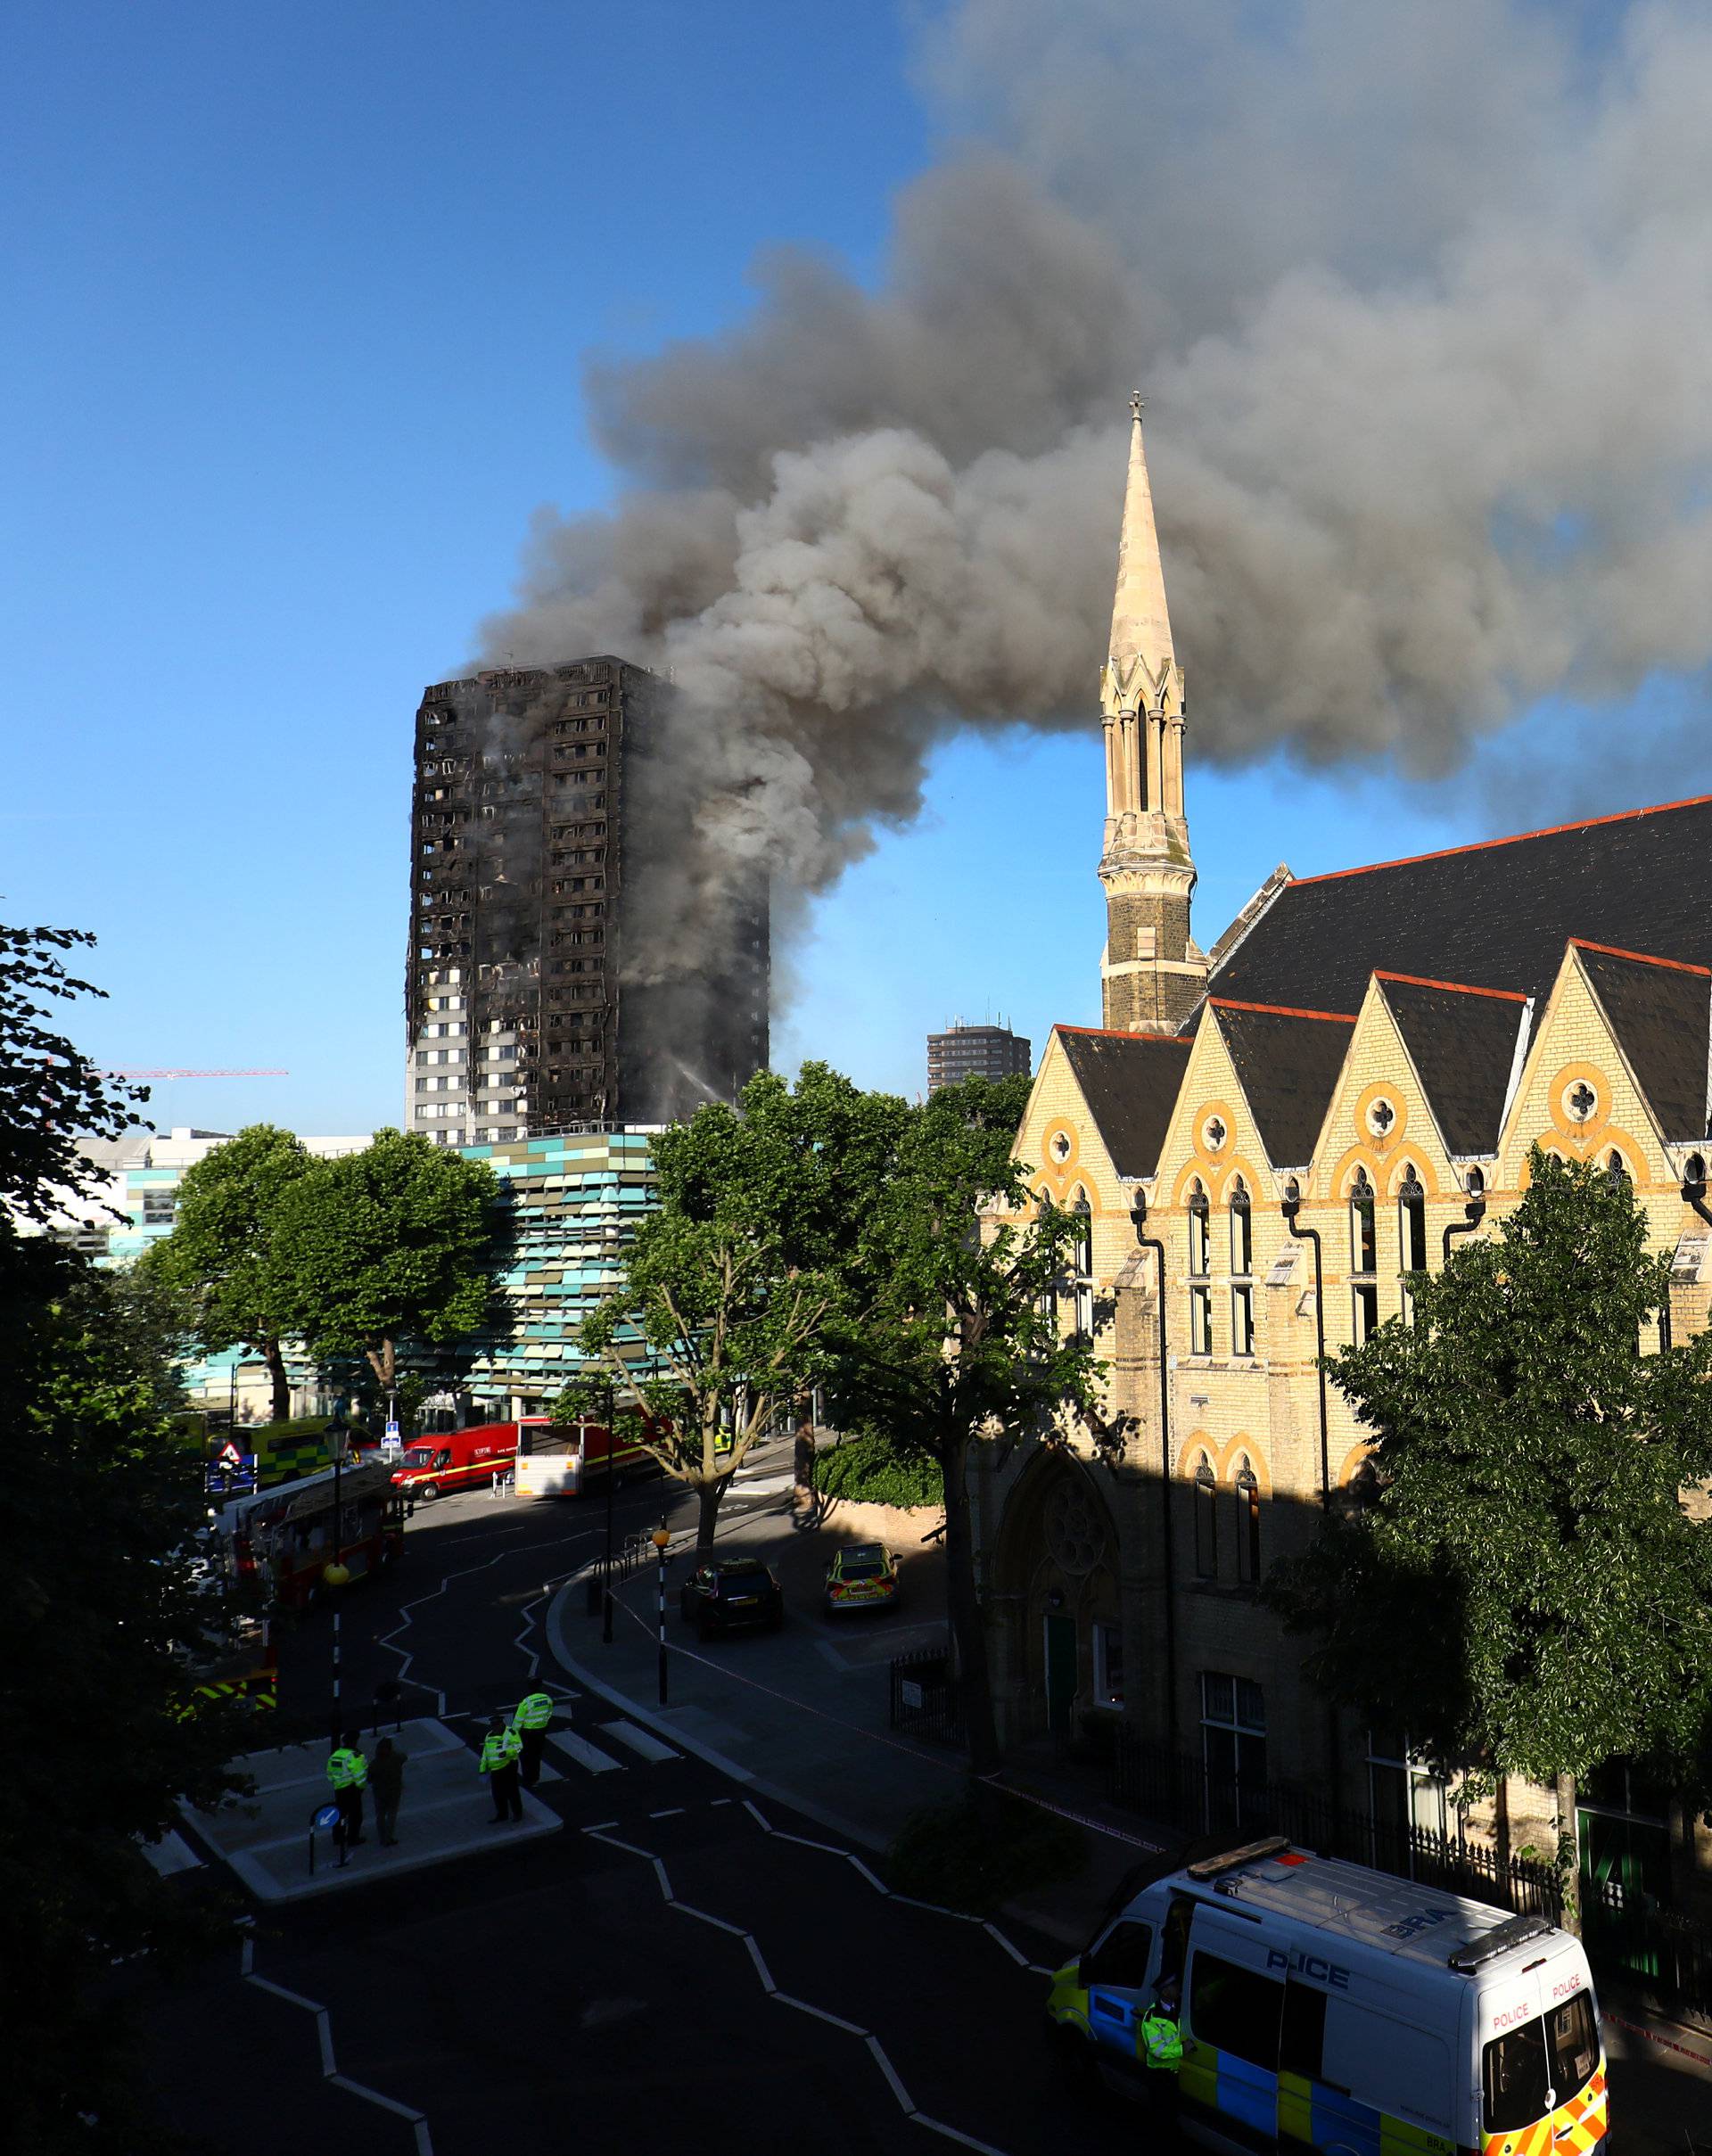 Police officers cordon off an area close to the scene of a serious fire in a tower block at Latimer Road in West London